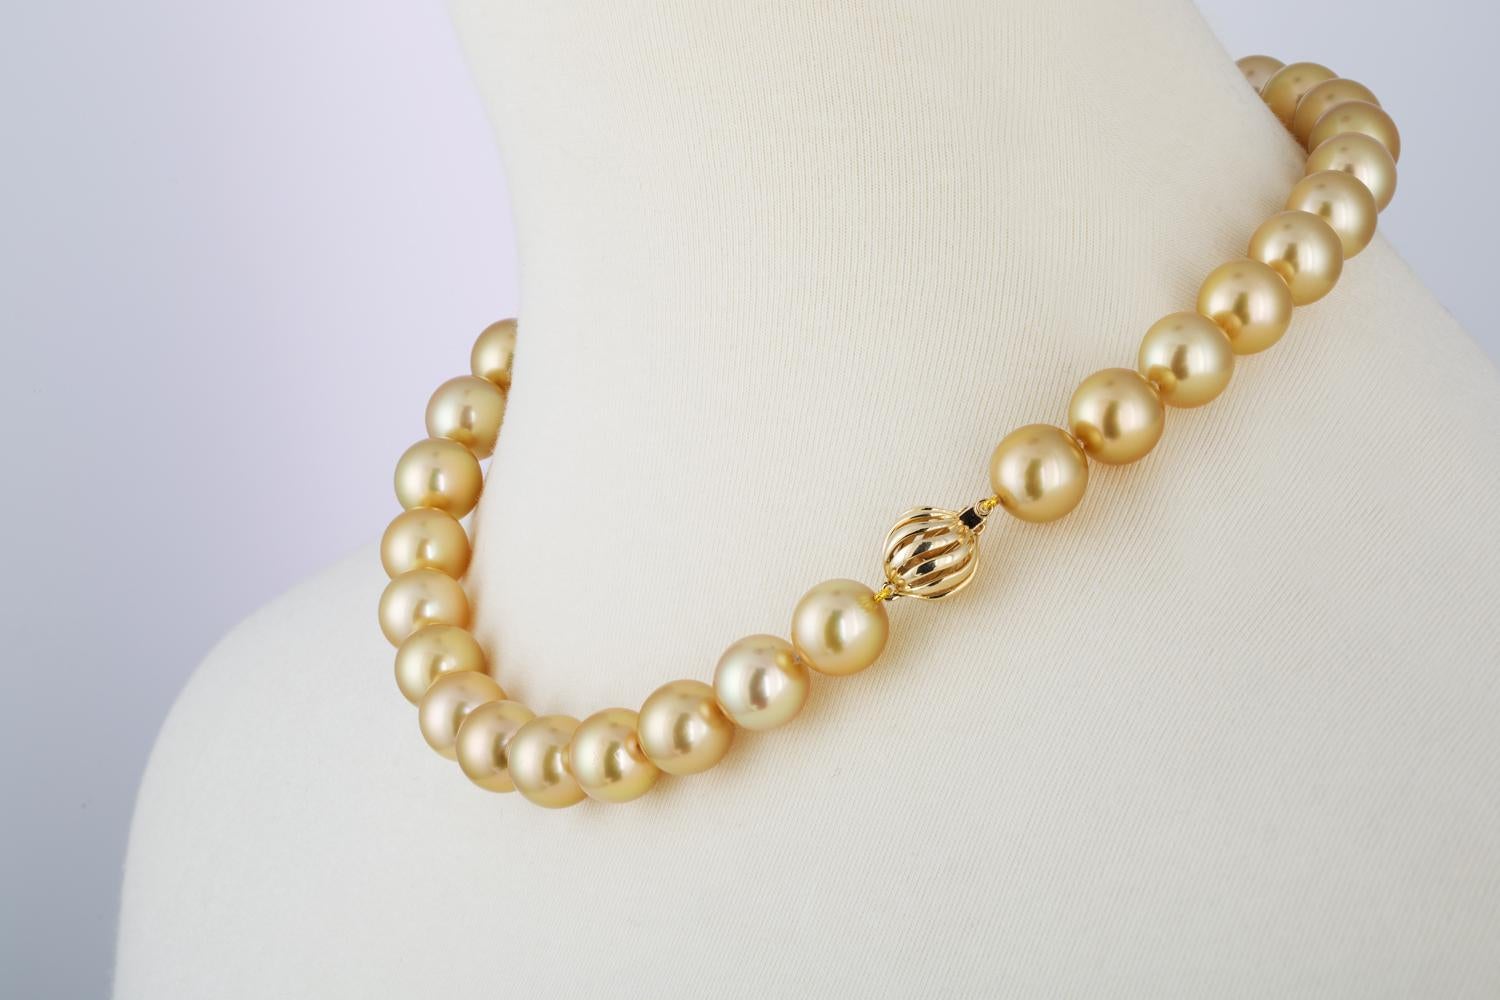 gem quality pearl necklace